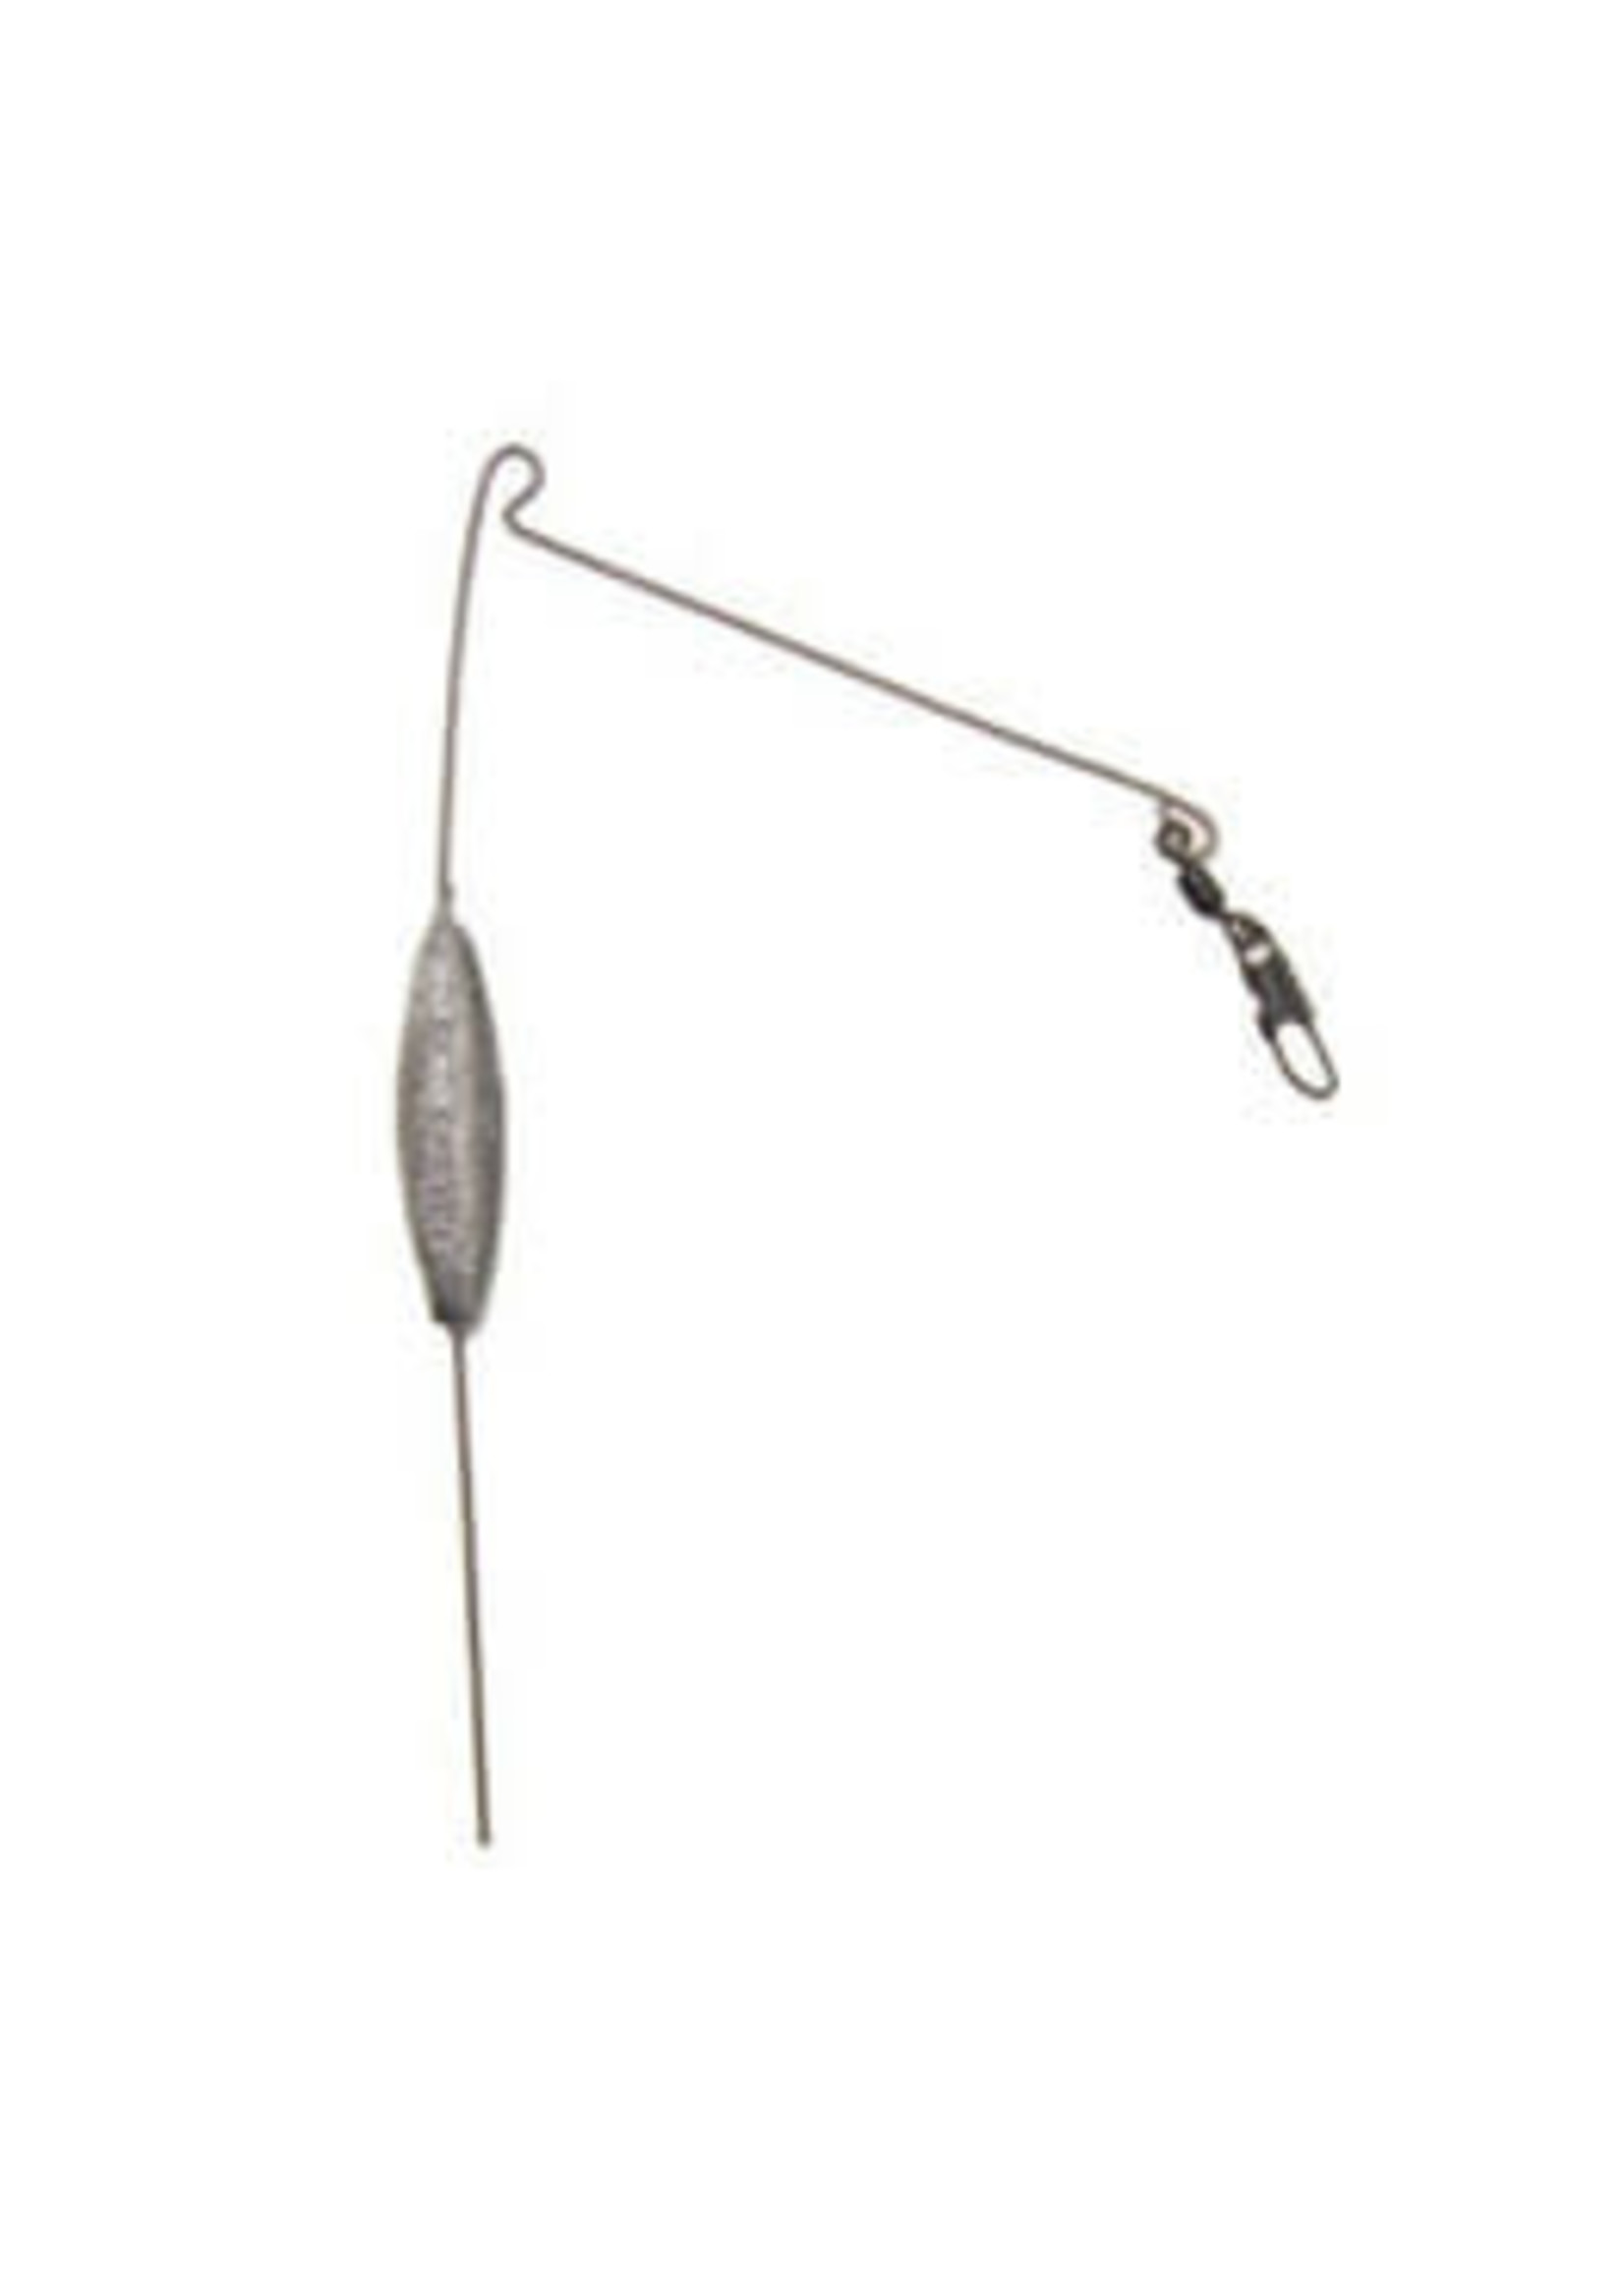 BELL OUTDOOR PRODUCTS SILVER CREEK BOTTOM BOUNCERS 1 1/2 oz 2PK